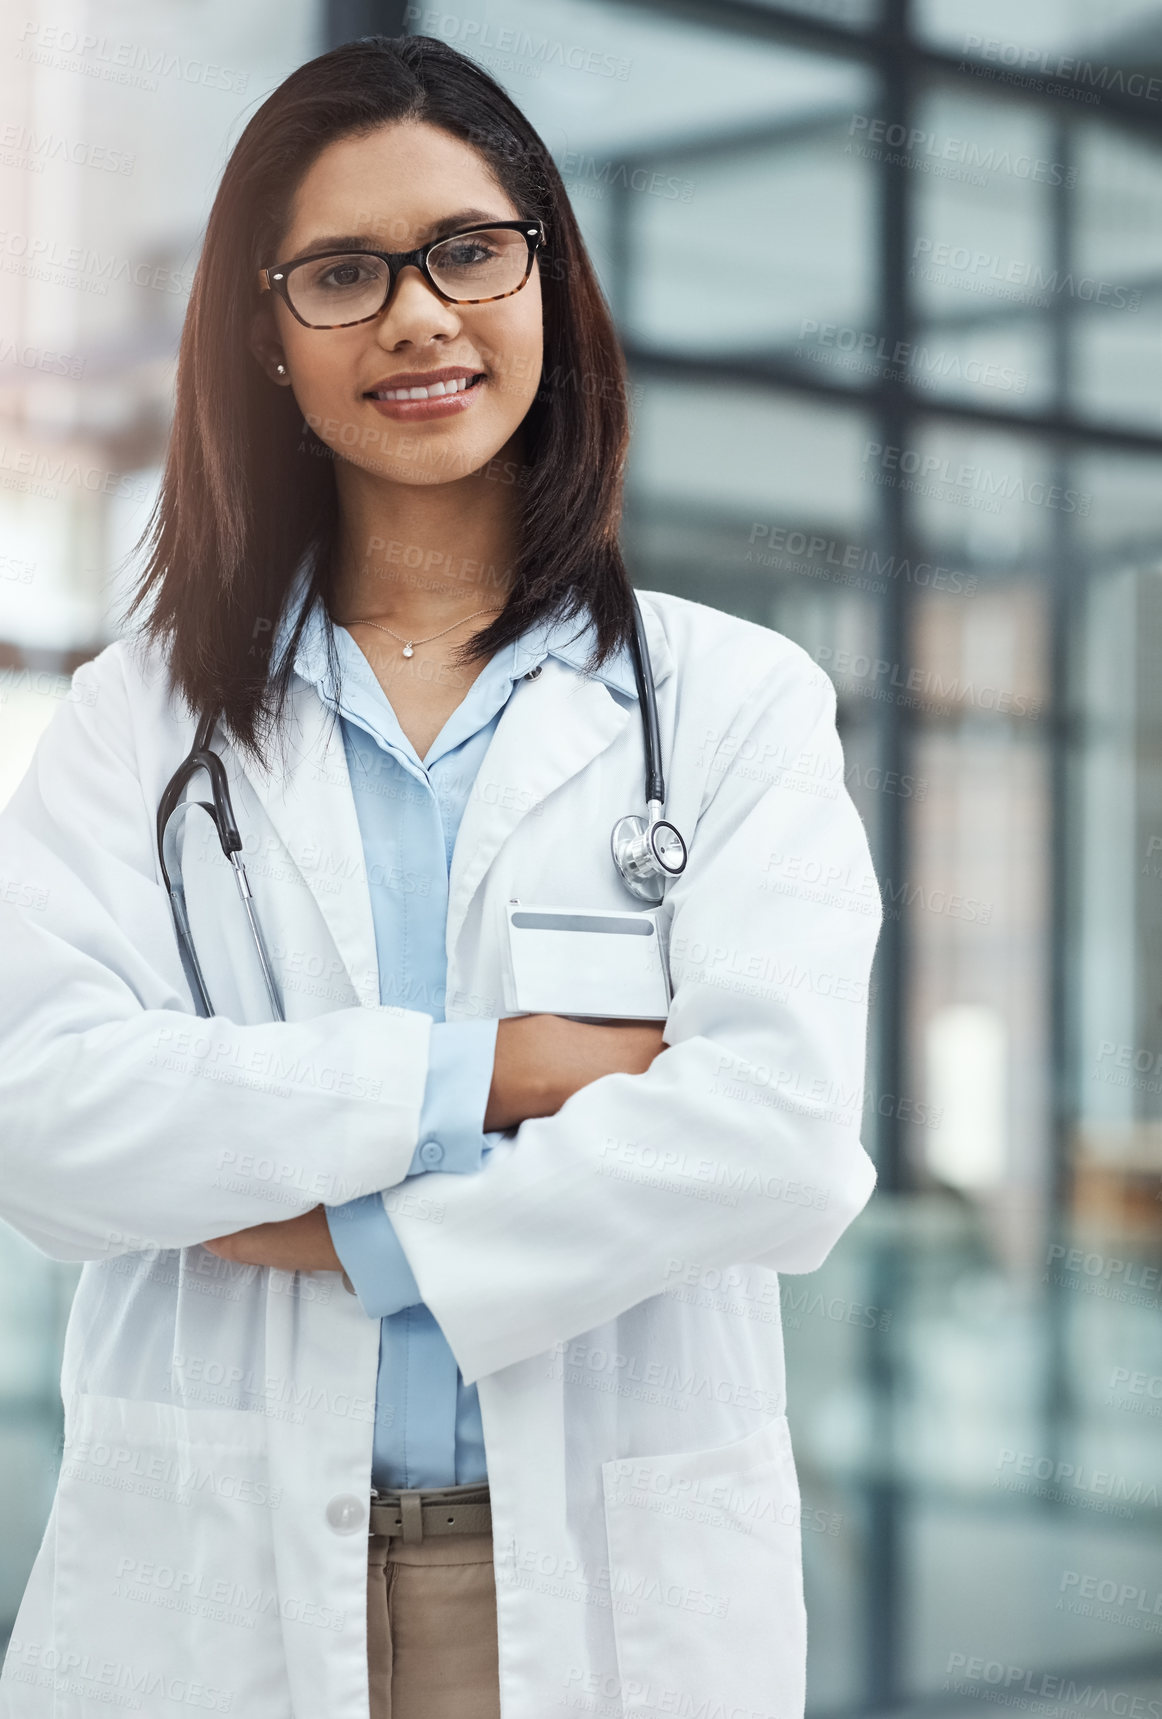 Buy stock photo Portrait of a confident young doctor working in a modern hospital